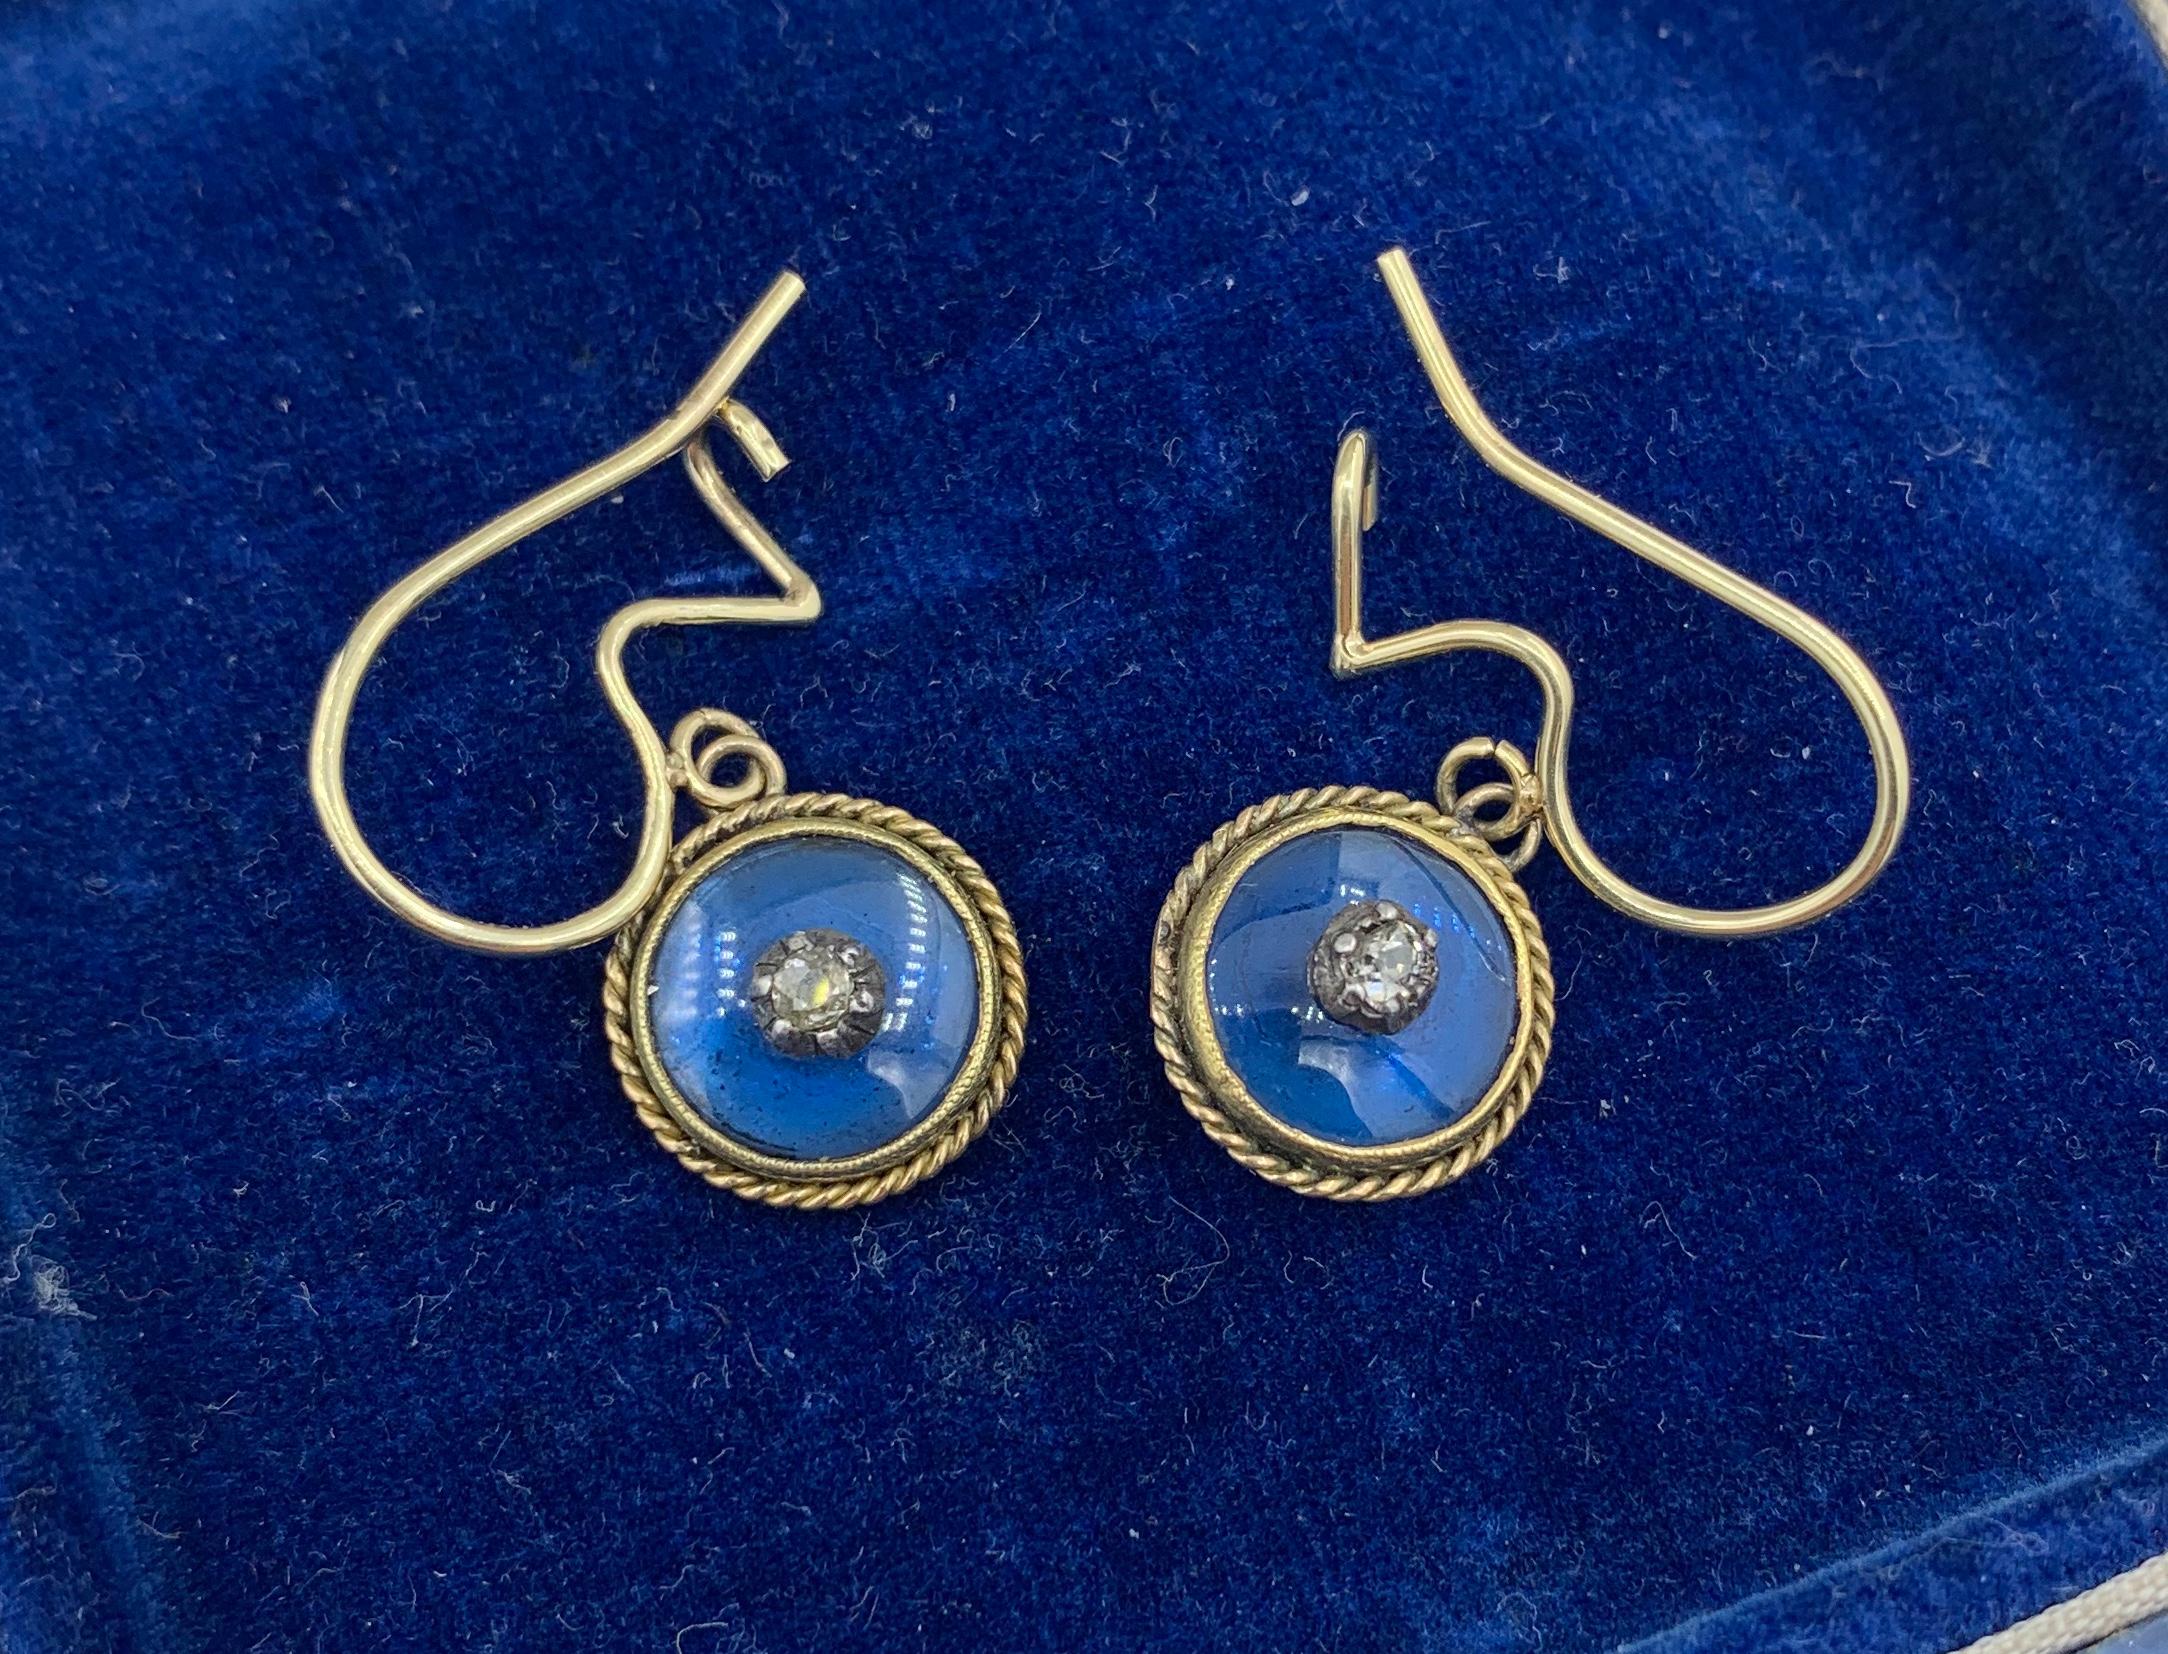 This is a stunning pair of Victorian to Art Deco Dangle Drop Earrings set with fabulous Old Mine Cut Diamonds in the center of Royal Blue Enamel circles in 14 Karat Gold.  The early earrings have Old Mine Diamonds which are set in cut down collets